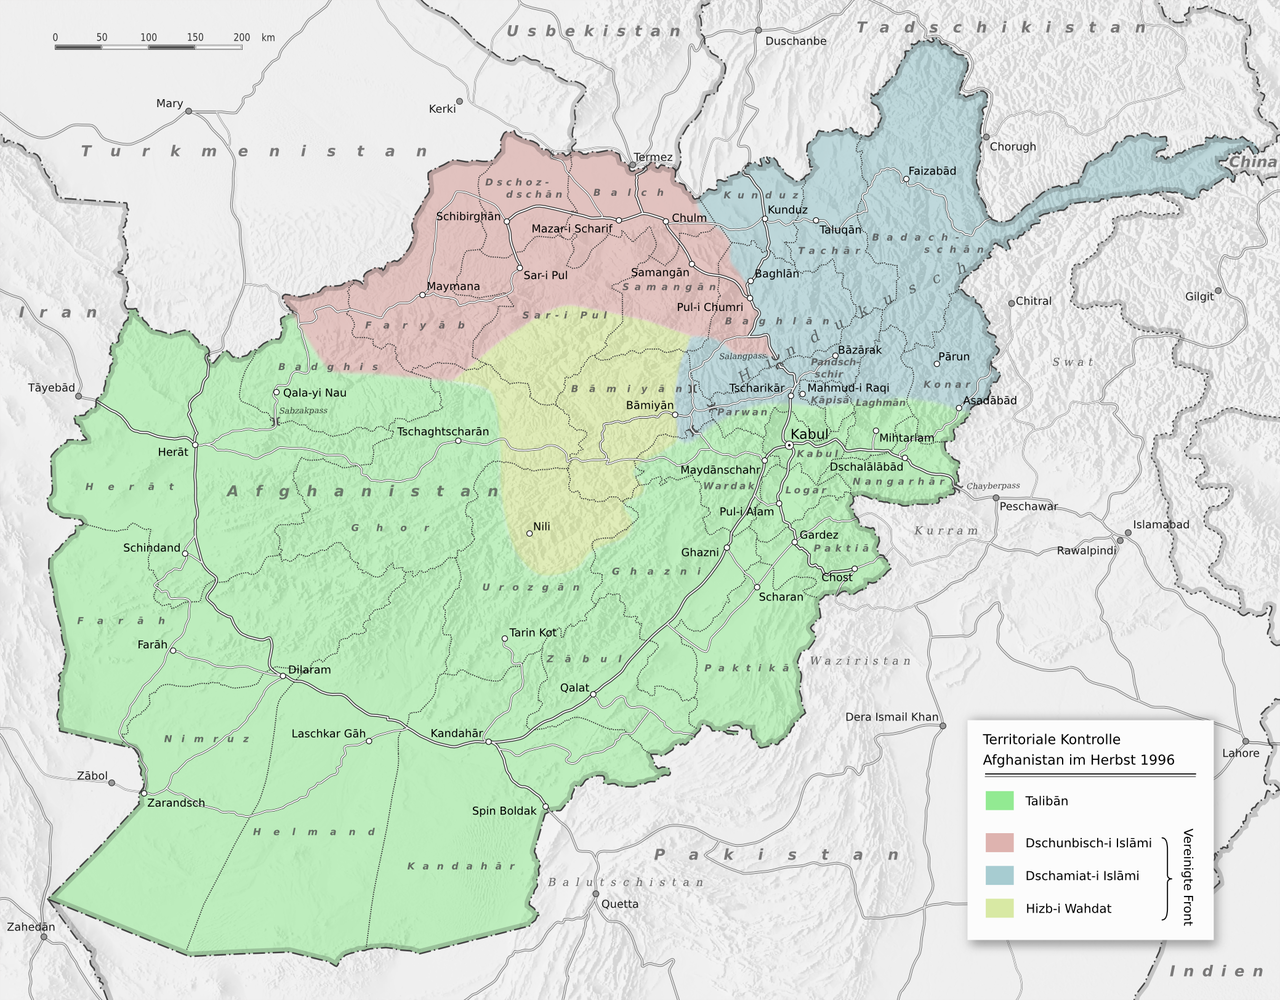 A German map showing the territorial control in Afghanistan in 1996, where green shows Taliban controlled areas.